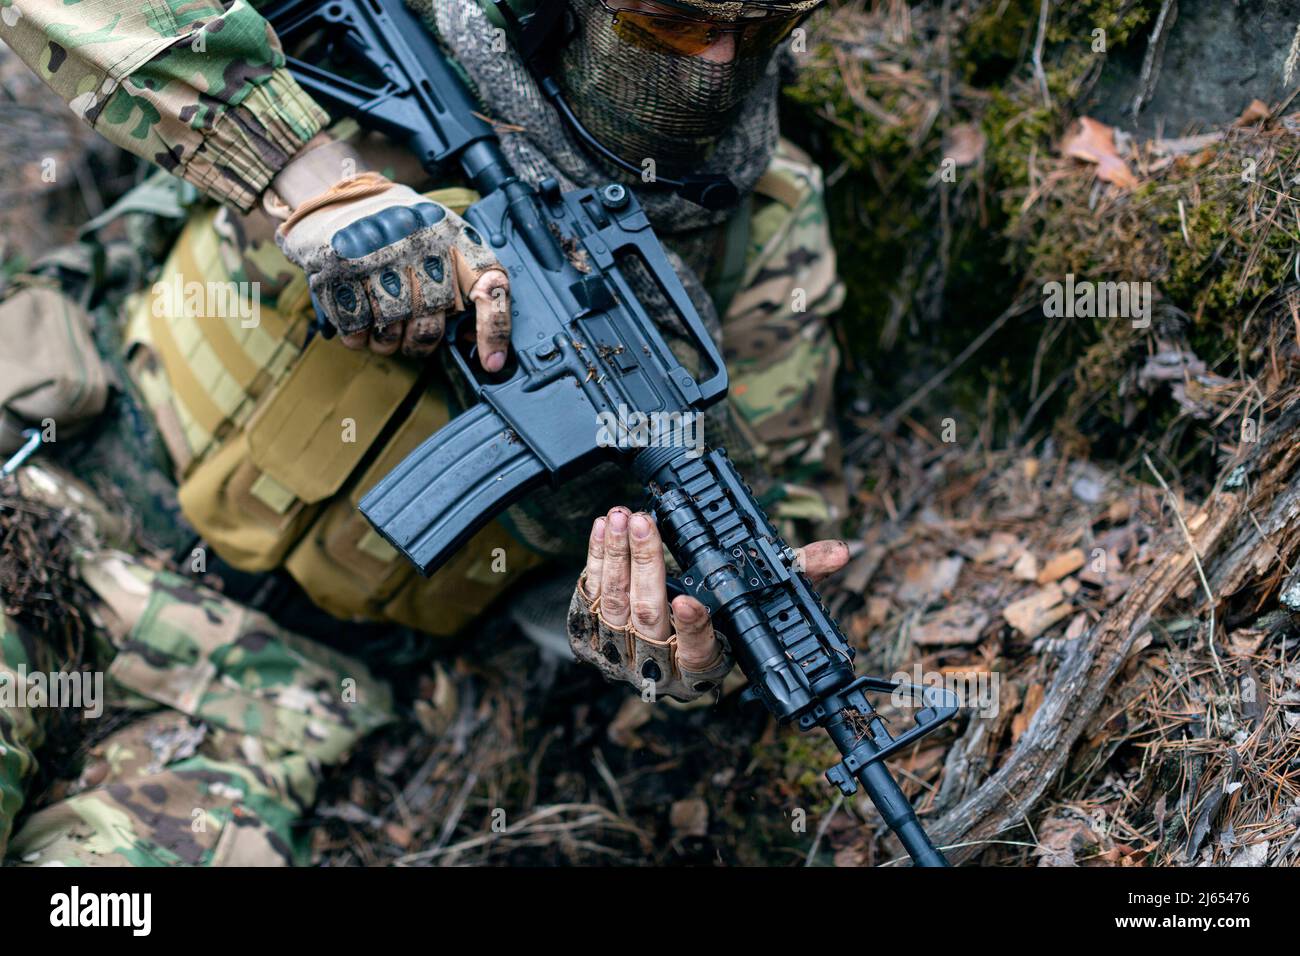 A mercenary soldier in in ambush. He is preparing to attack the enemy. Close-up view. Selective focus on his weapon. Stock Photo